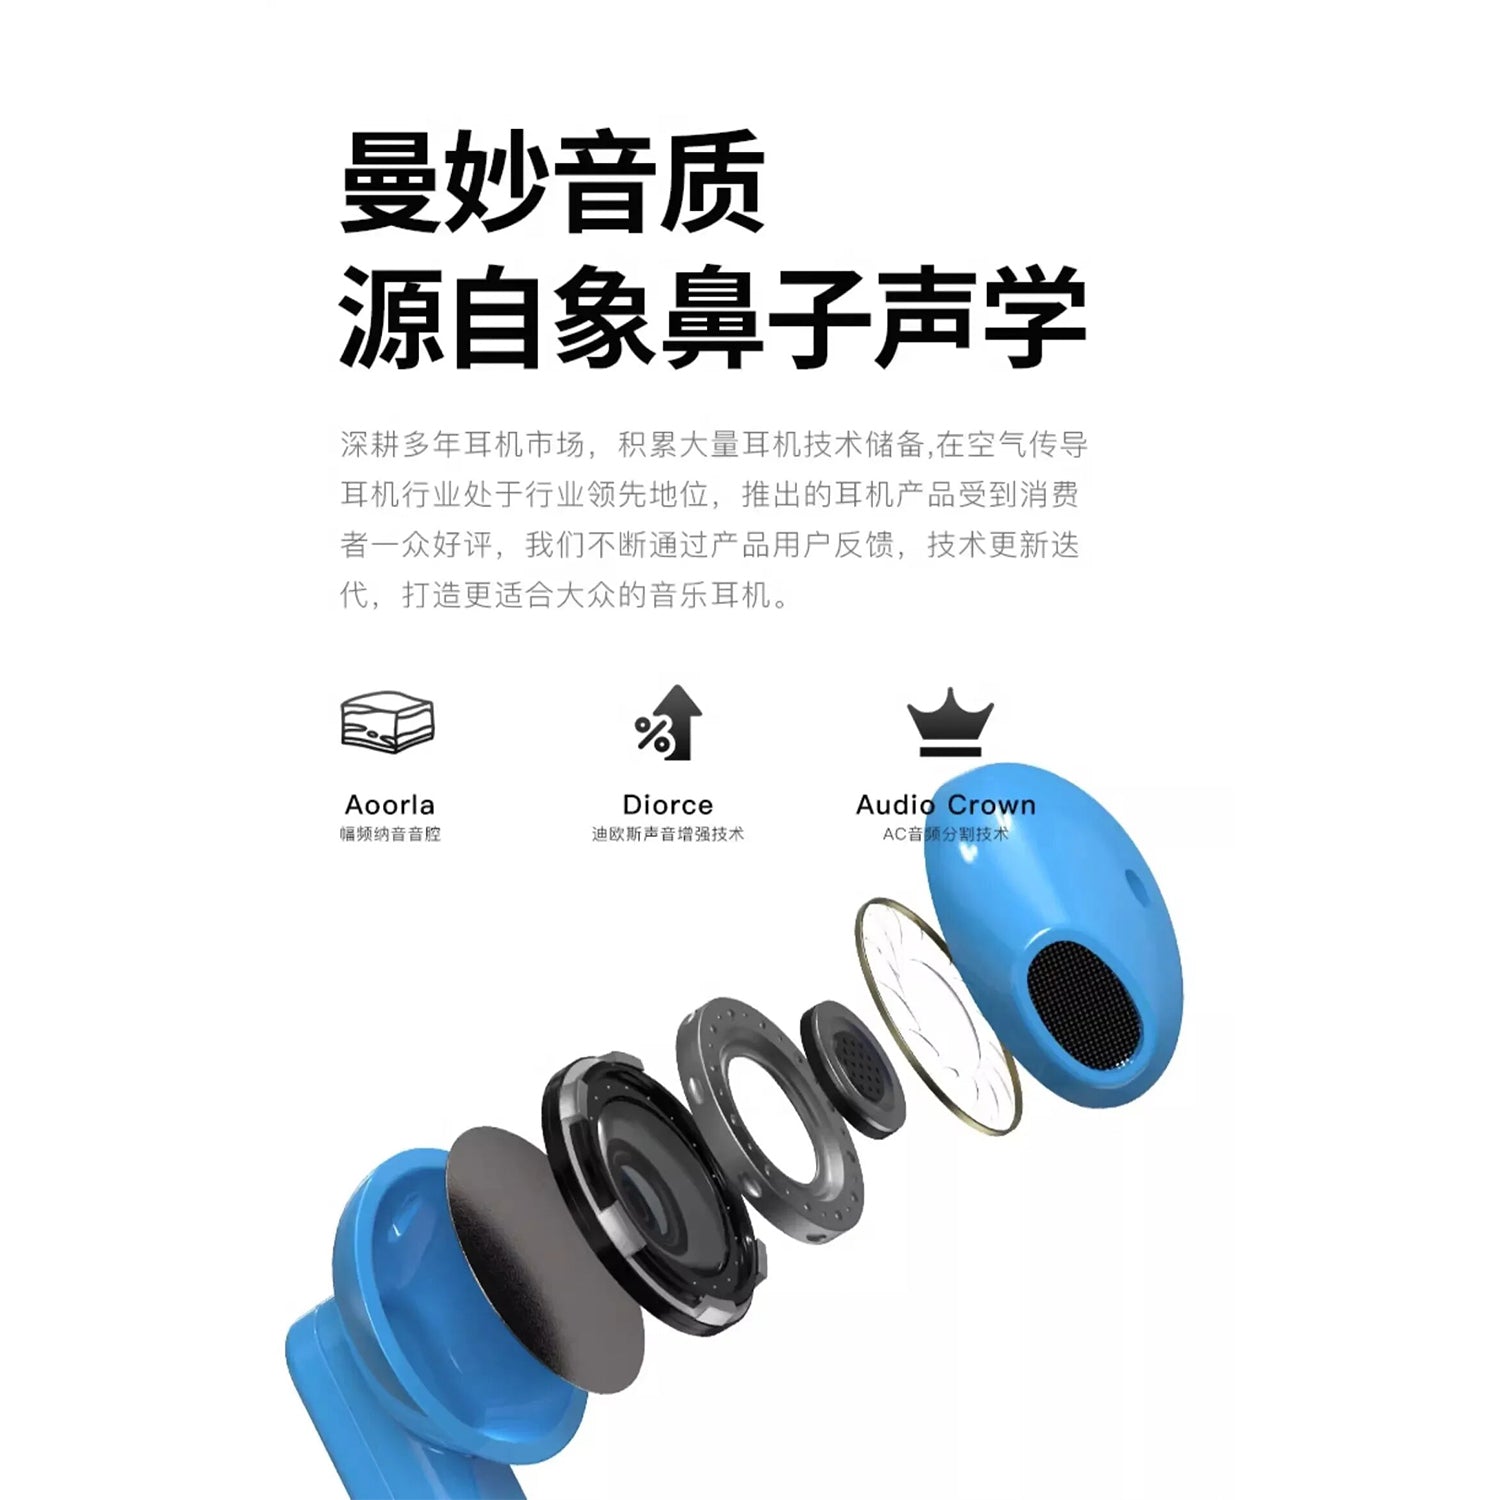 O2W SELECTION DMOOSTER D36 LEGO Hanging Rope Box In-Ear Bluetooth Sports Wireless Earphones With App